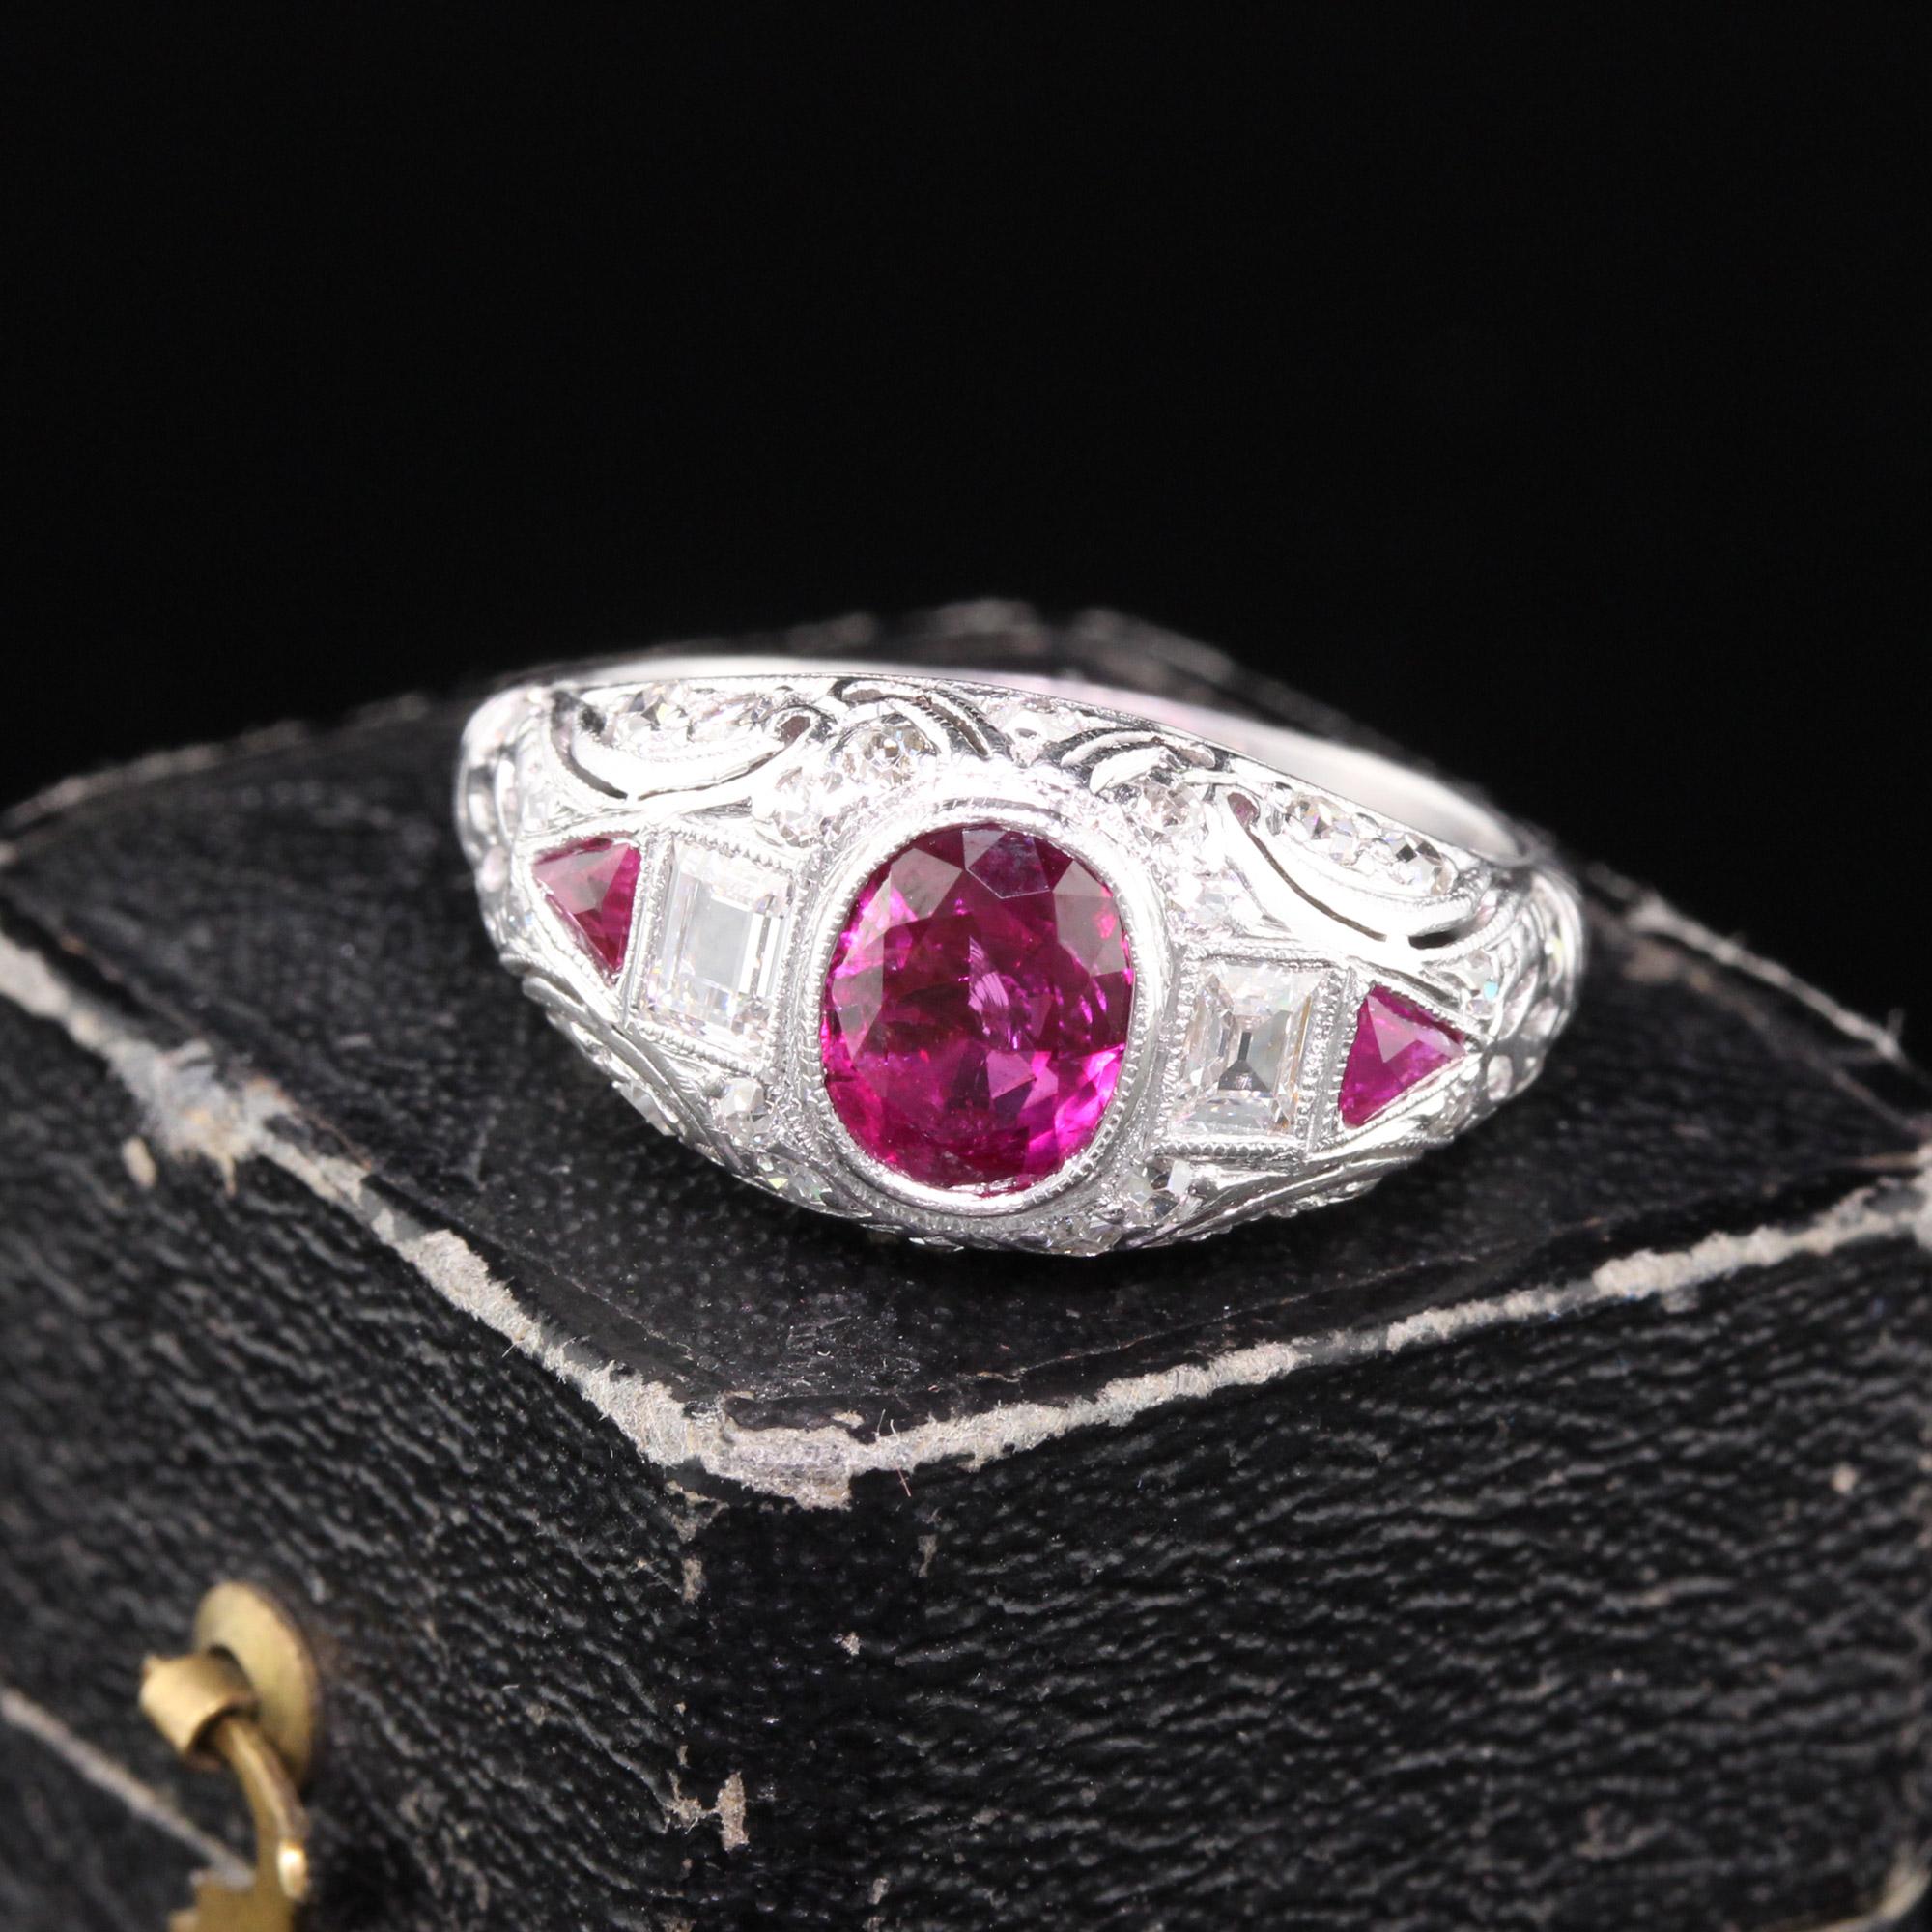 Magnificent Edwardian ring featuring a GIA certified Burma no heat ruby in the center surrounded by two rectangular carre cut diamonds and trillion cut burma rubies in a pristine platinum diamond mounting. A work of art in excellent